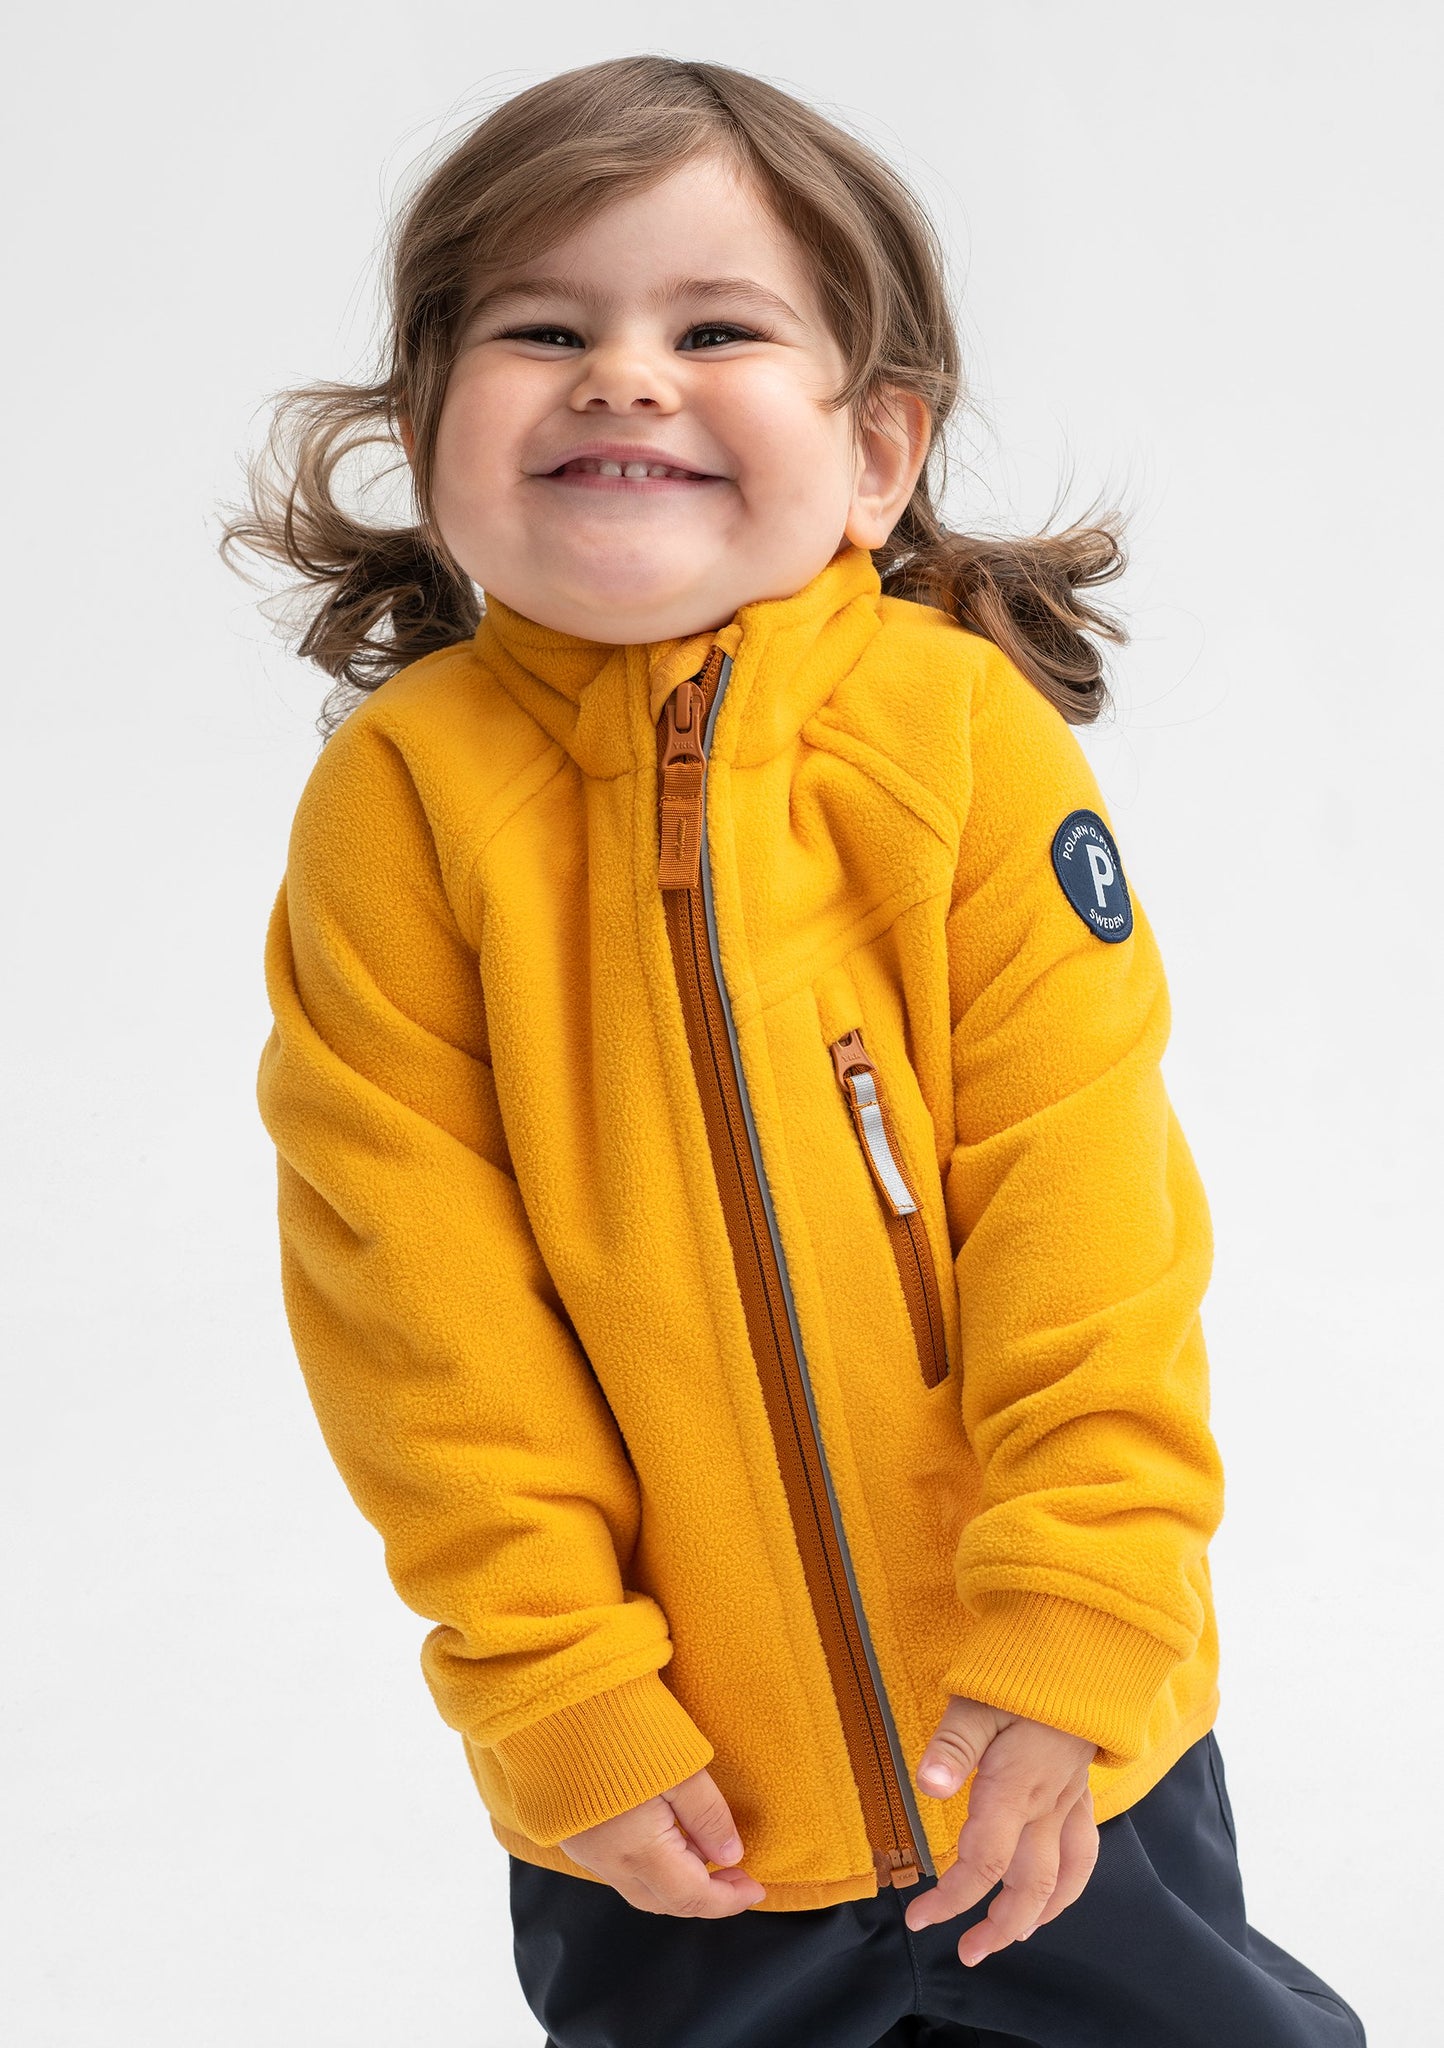 A smiling toddler wearing a yellow, kids waterproof fleece jacket, made of soft and breathable fabric, with zip reflectors.